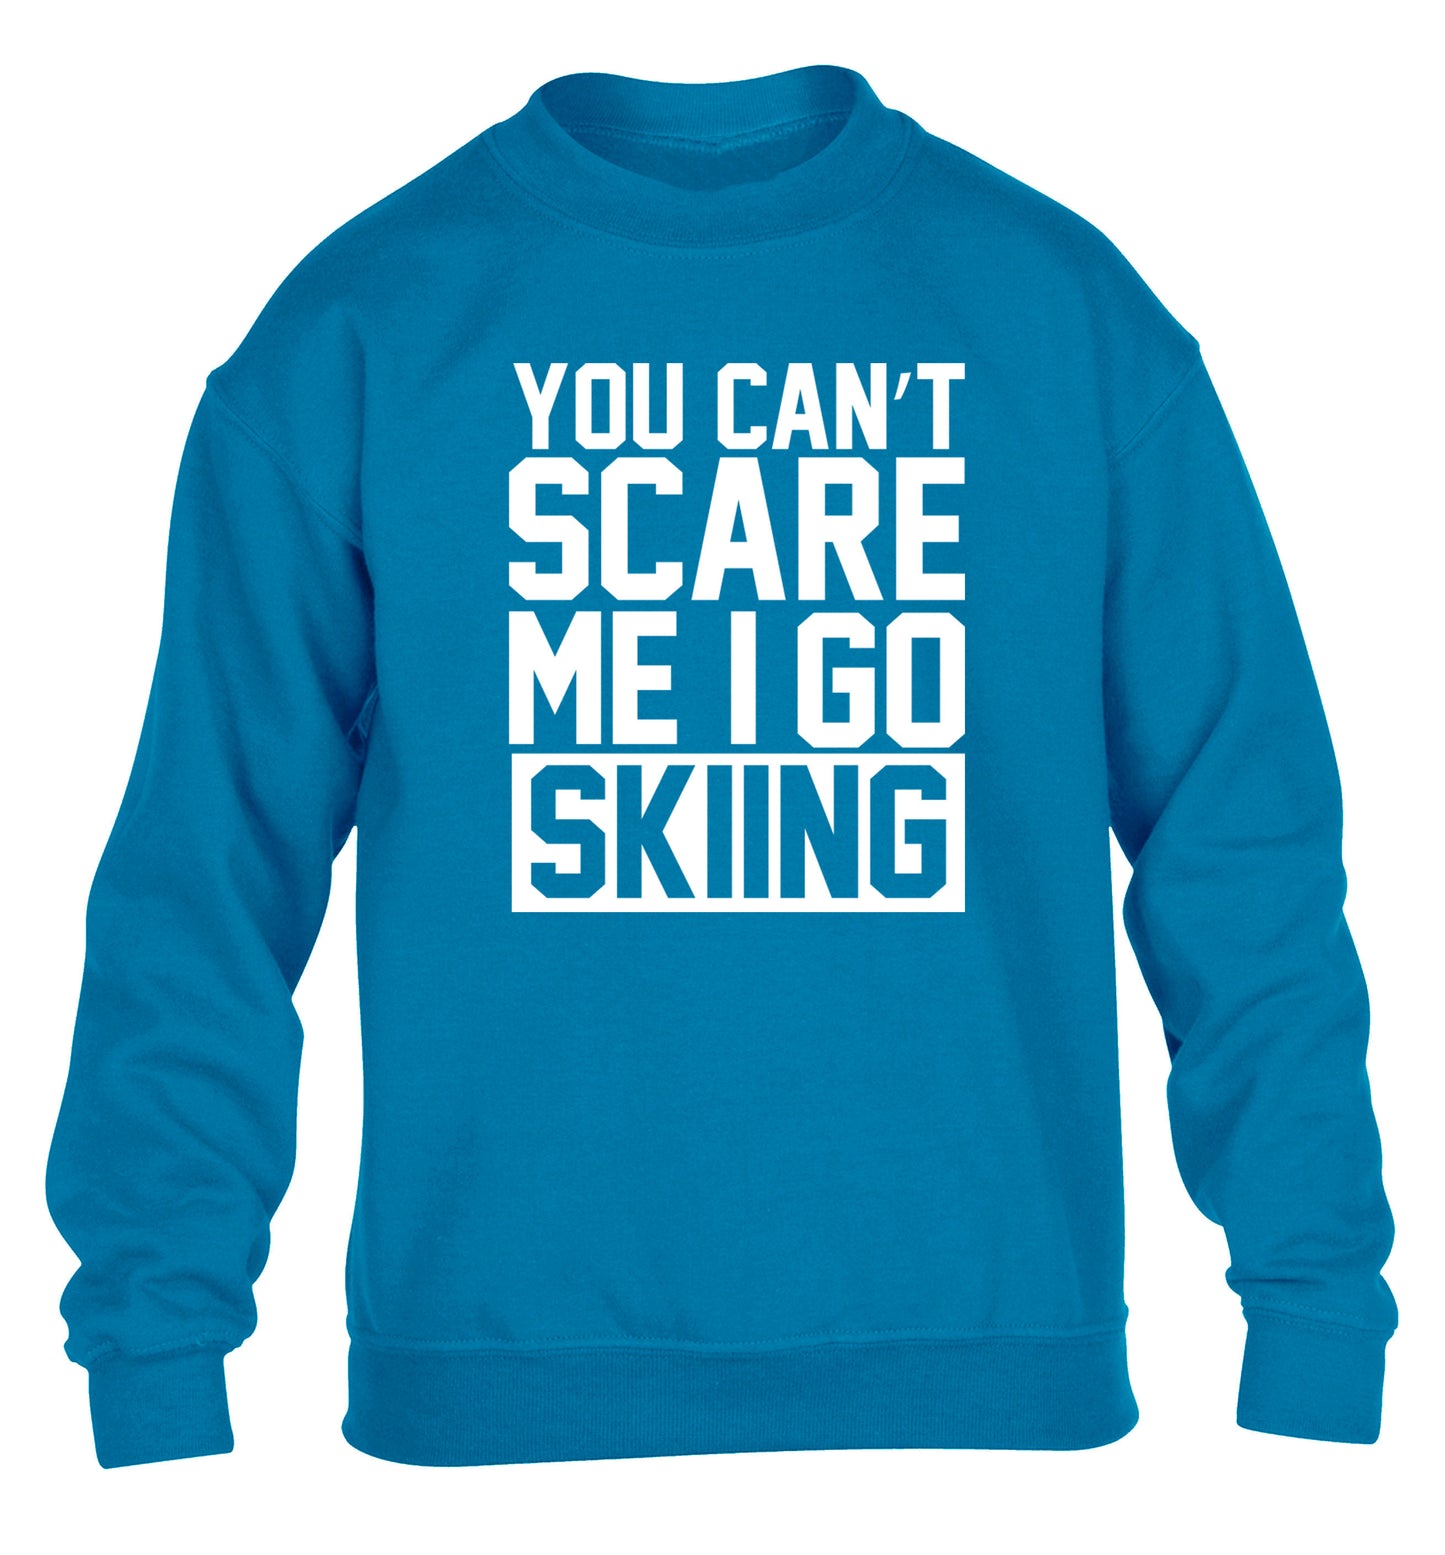 You can't scare me I go skiing children's blue sweater 12-14 Years